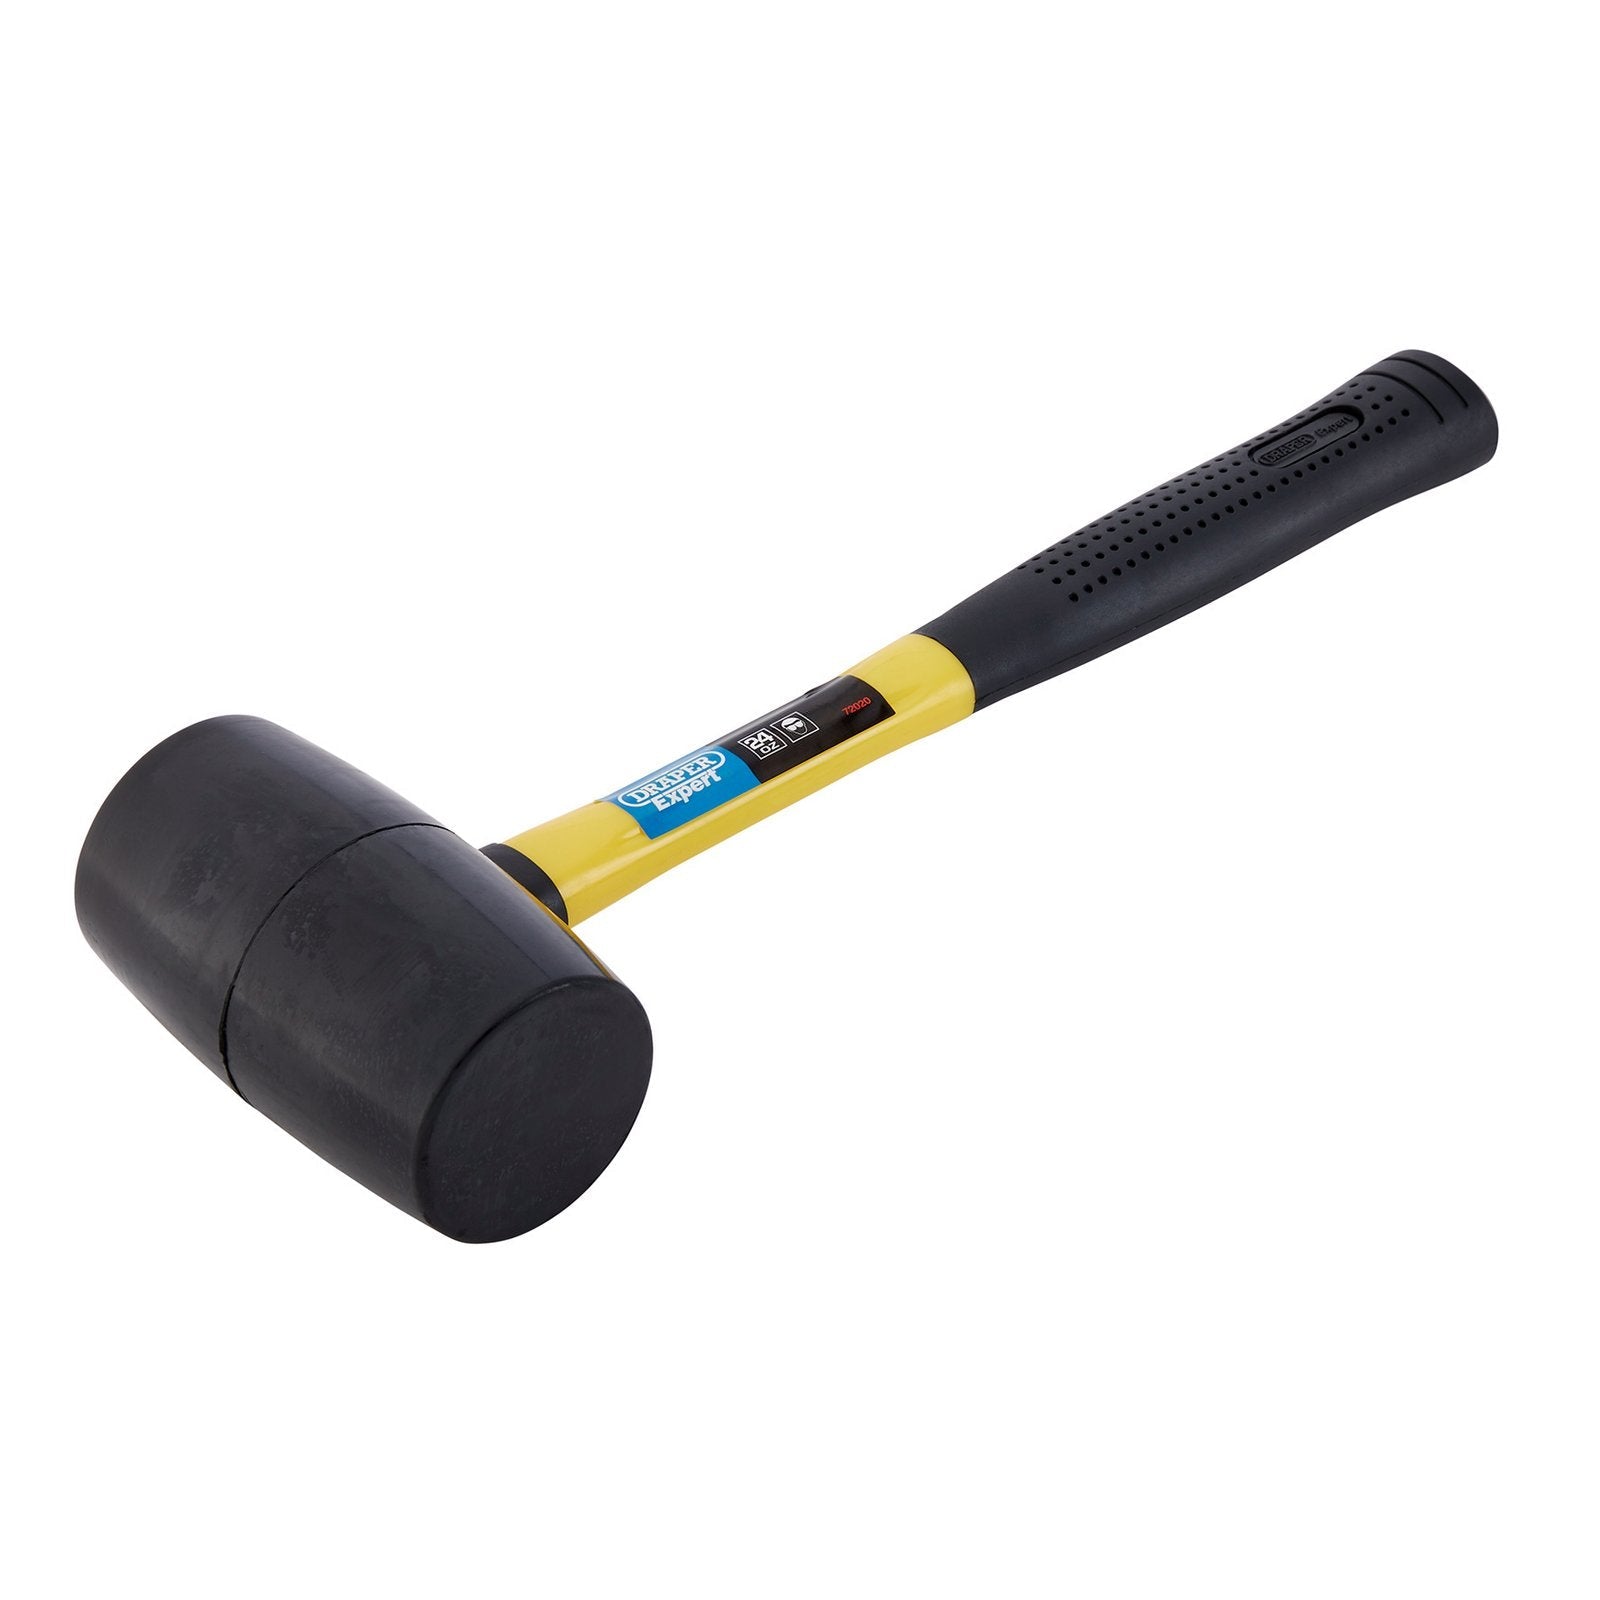 Rubber Hammer / Rubber Mallet - Fabric Farms